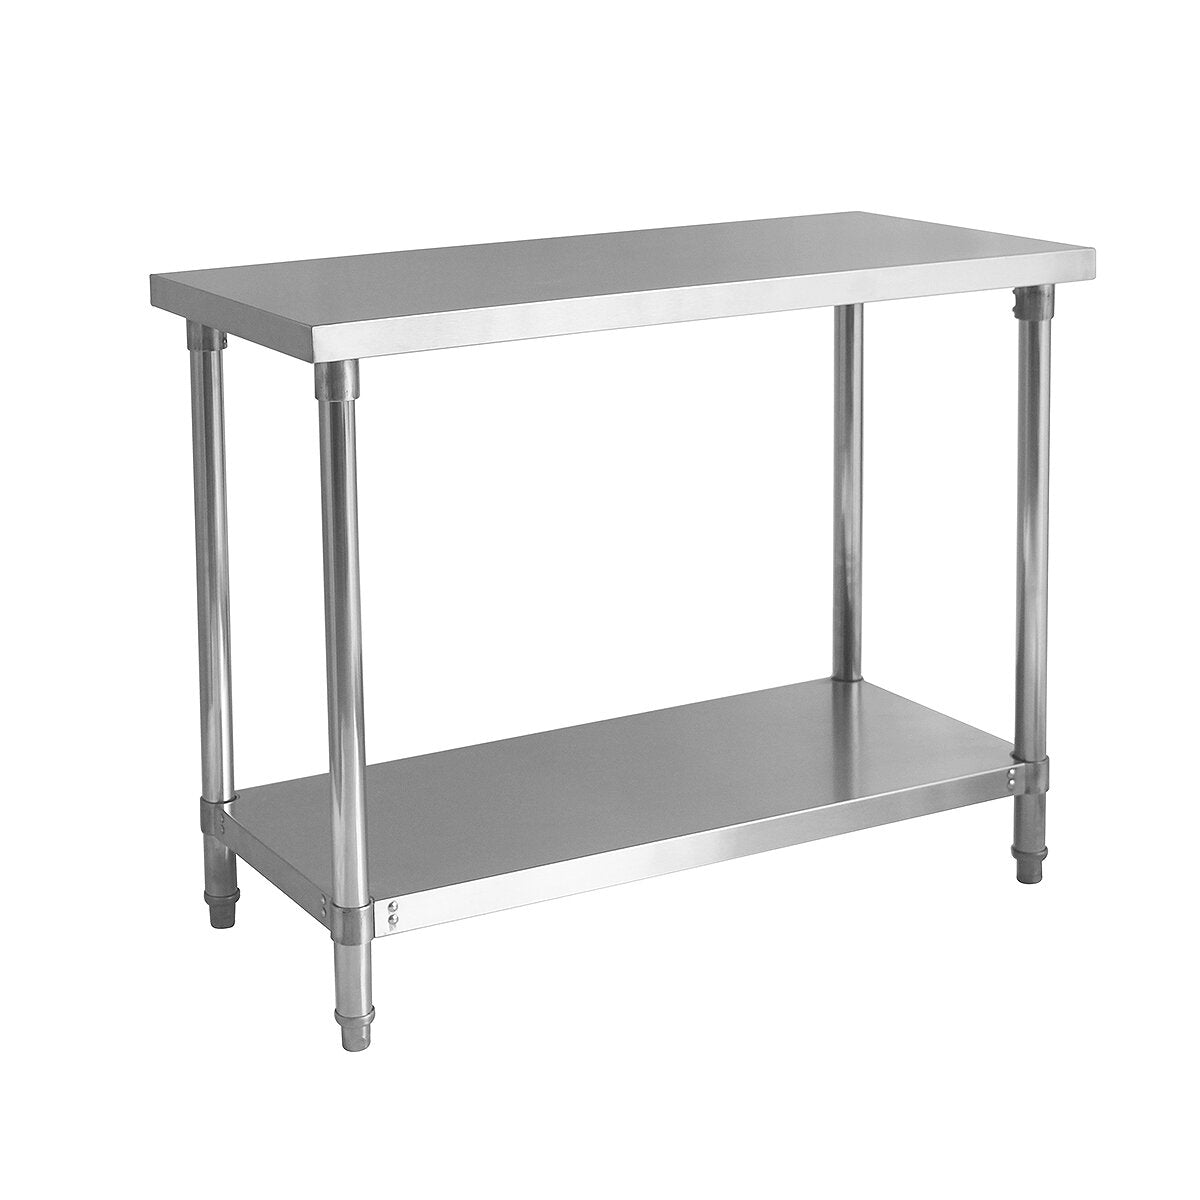 141005 - Stainless Steel Table 1800mm